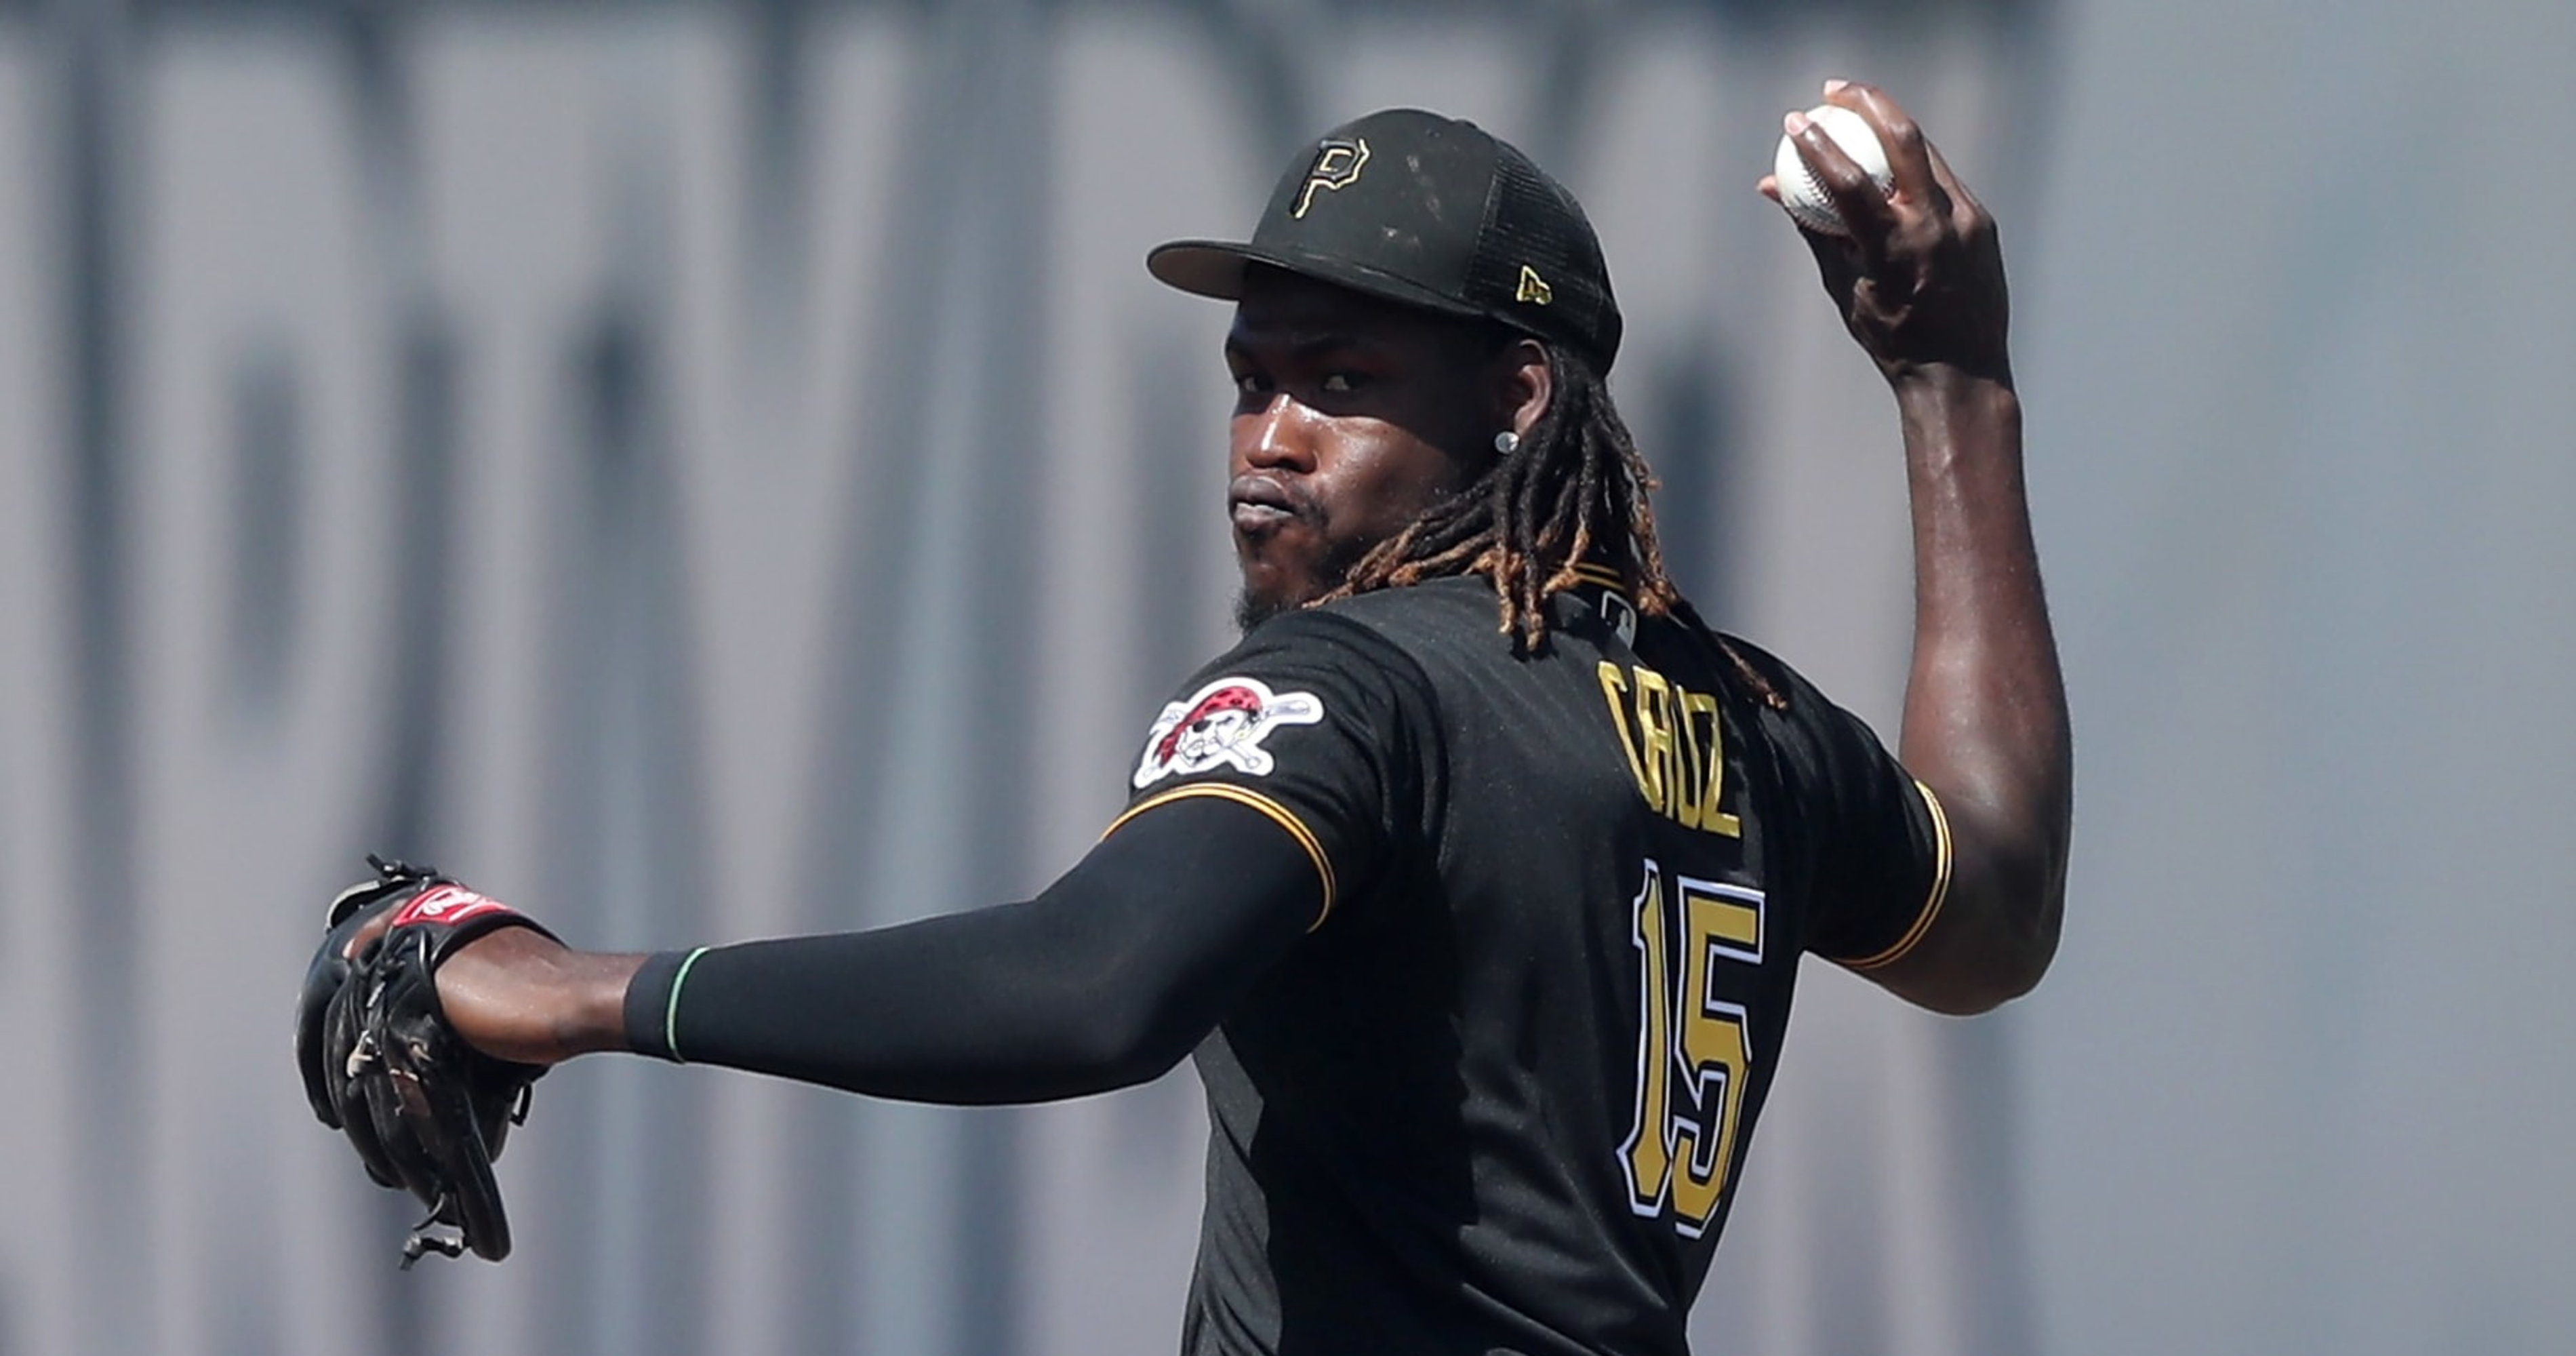 Pittsburgh Pirates Oneil Cruz (15) bats during a spring training baseball  game against the Baltimore Orioles